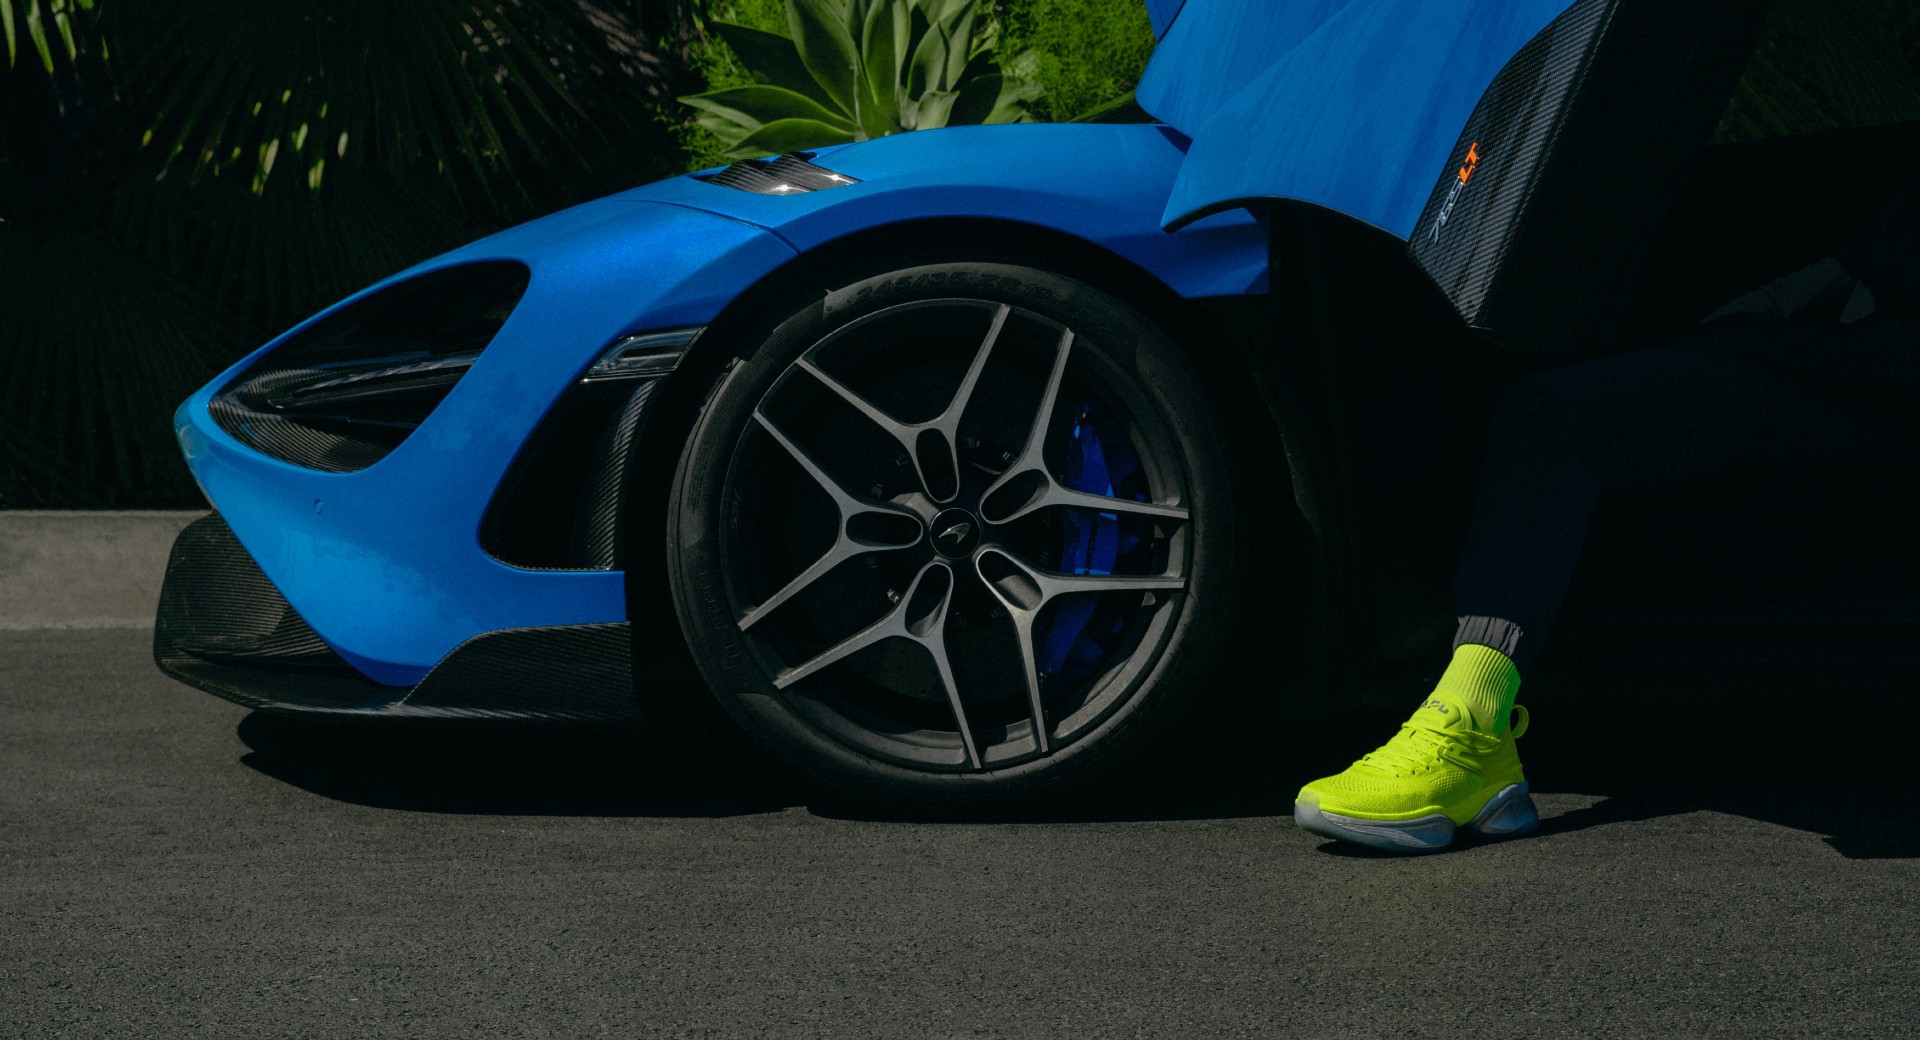 New McLaren Hyspeed Sneakers From Athletic Propulsion Labs Will